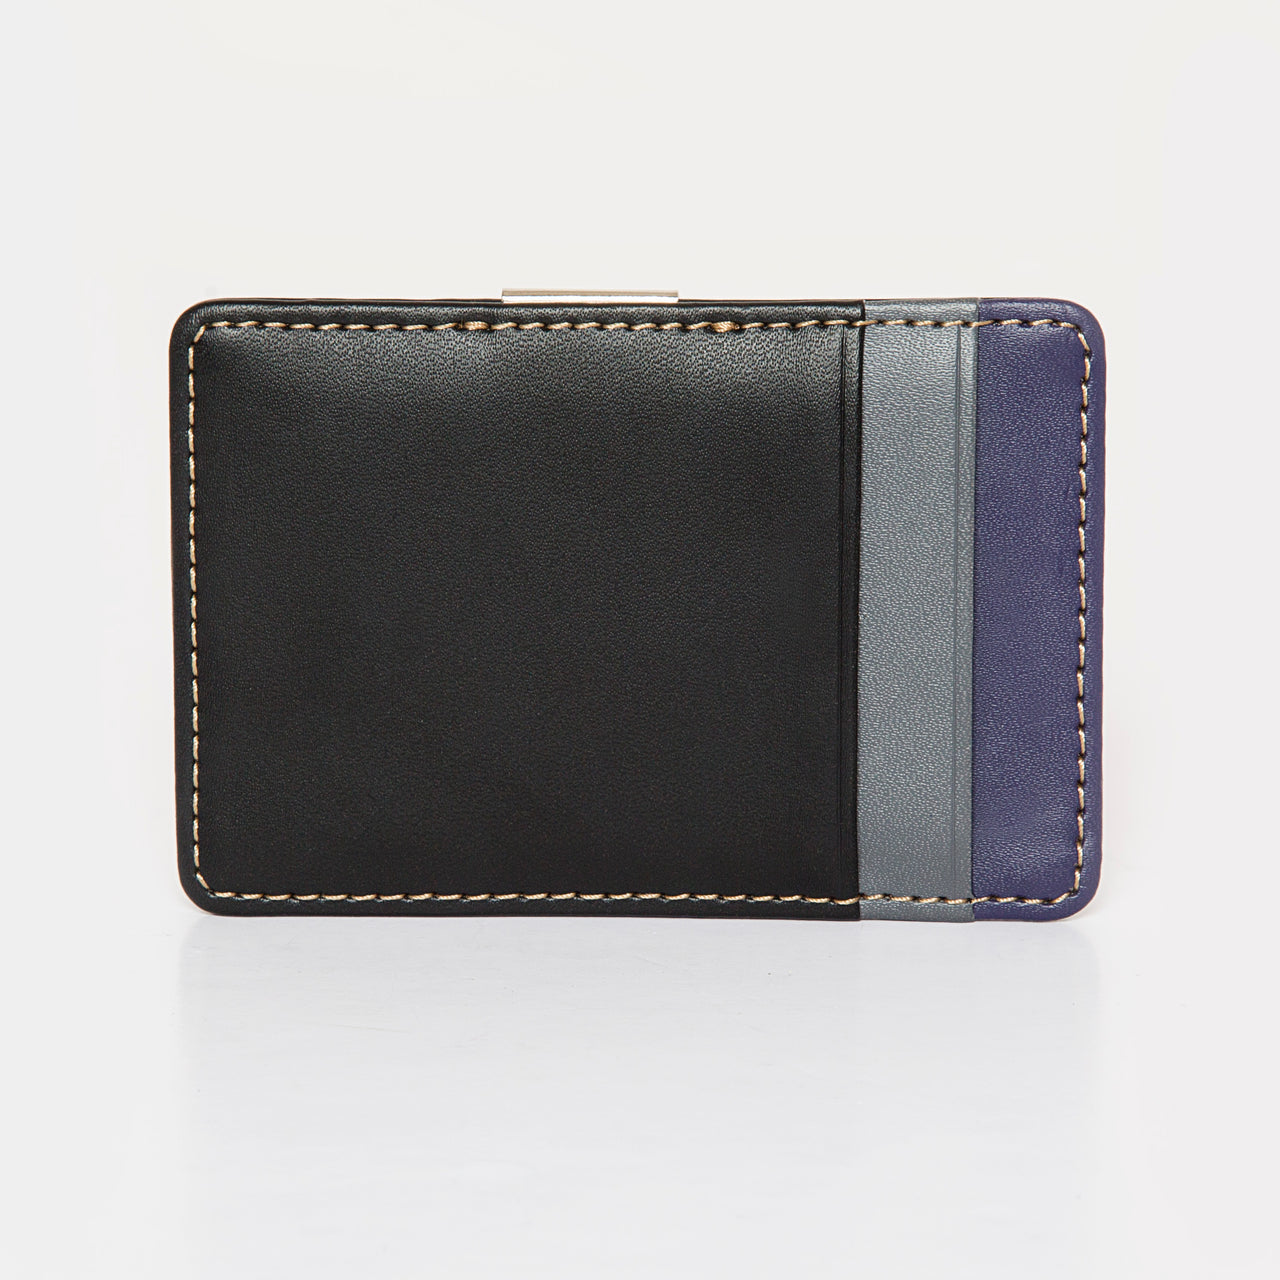 black, grey, and purple wallet with two card slots.